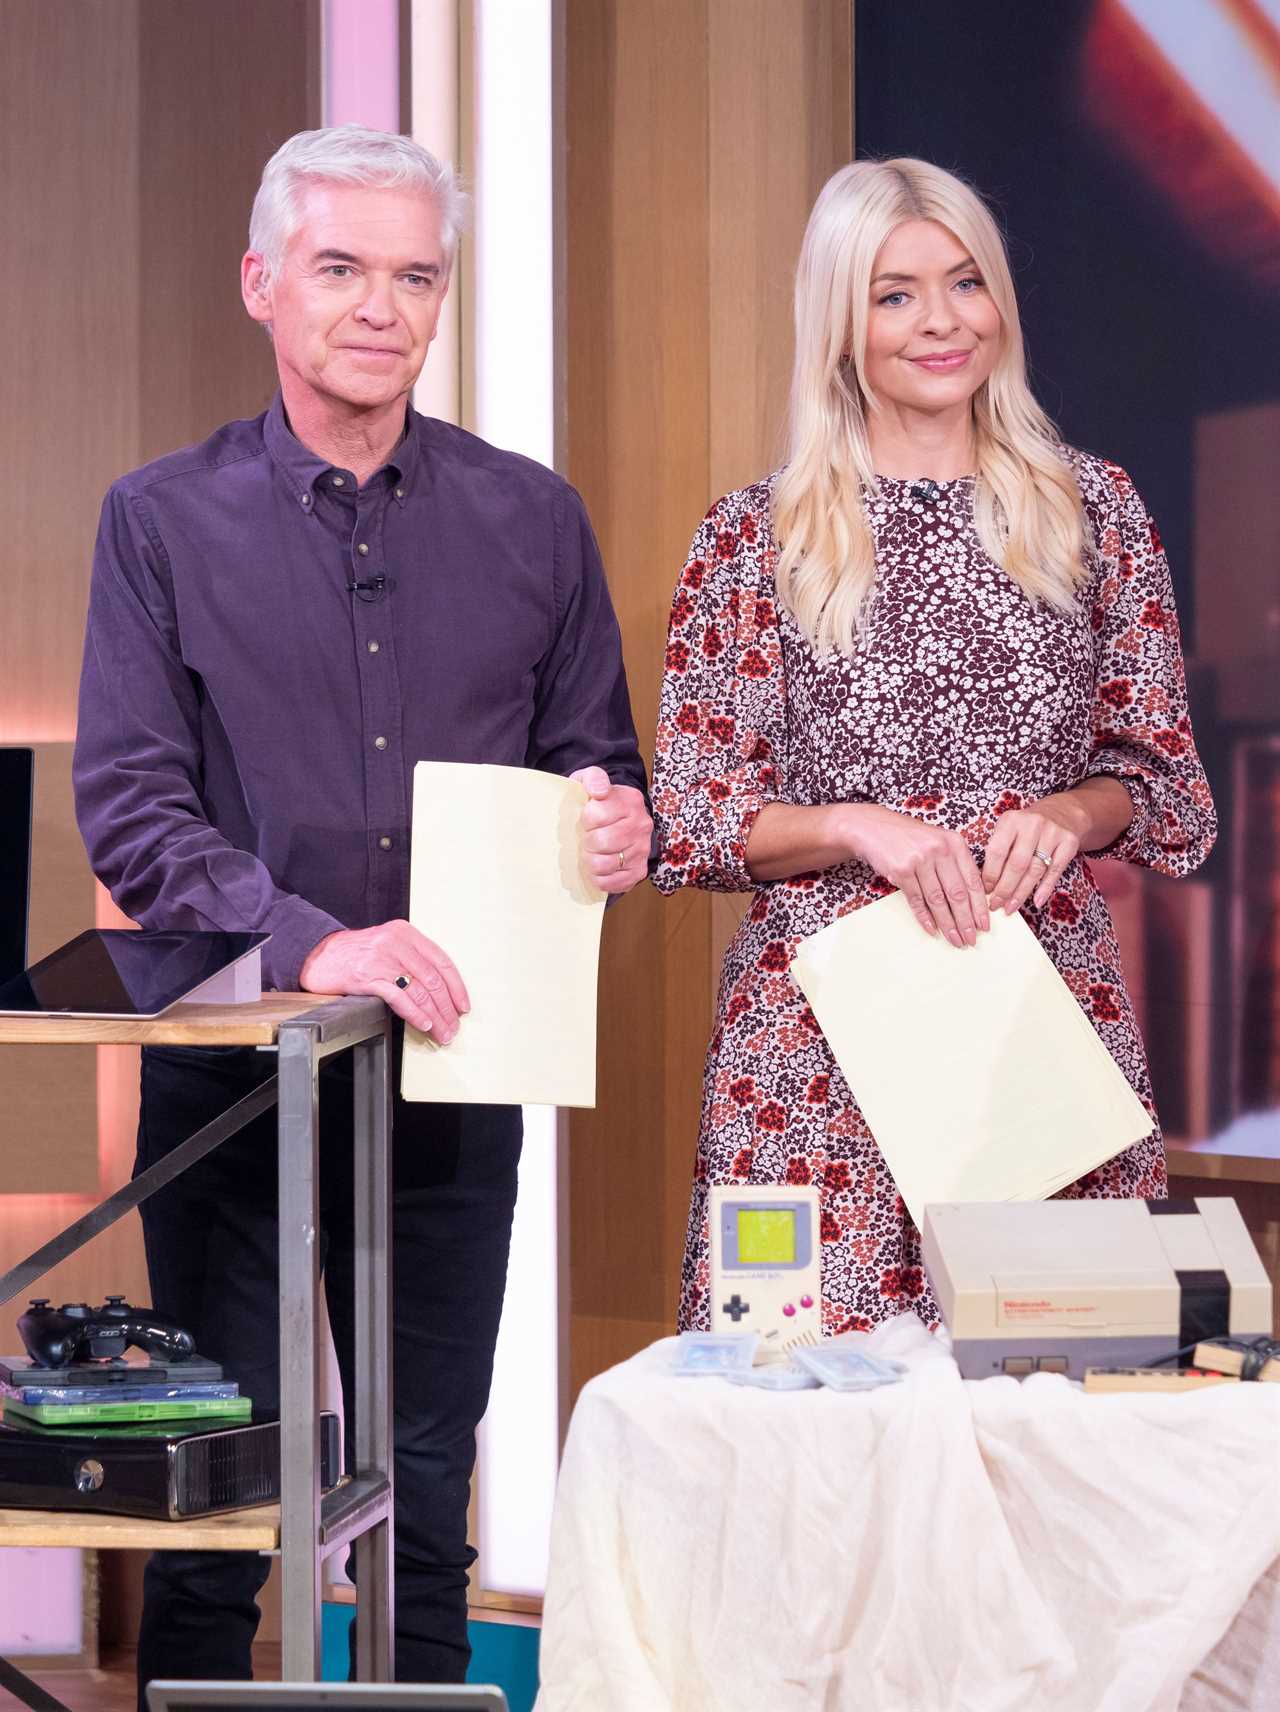 Editorial use only Mandatory Credit: Photo by S Meddle/ITV/Shutterstock (13411128ab) Phillip Schofield, Holly Willoughby 'This Morning' TV show, London, UK - 22 Sep 2022